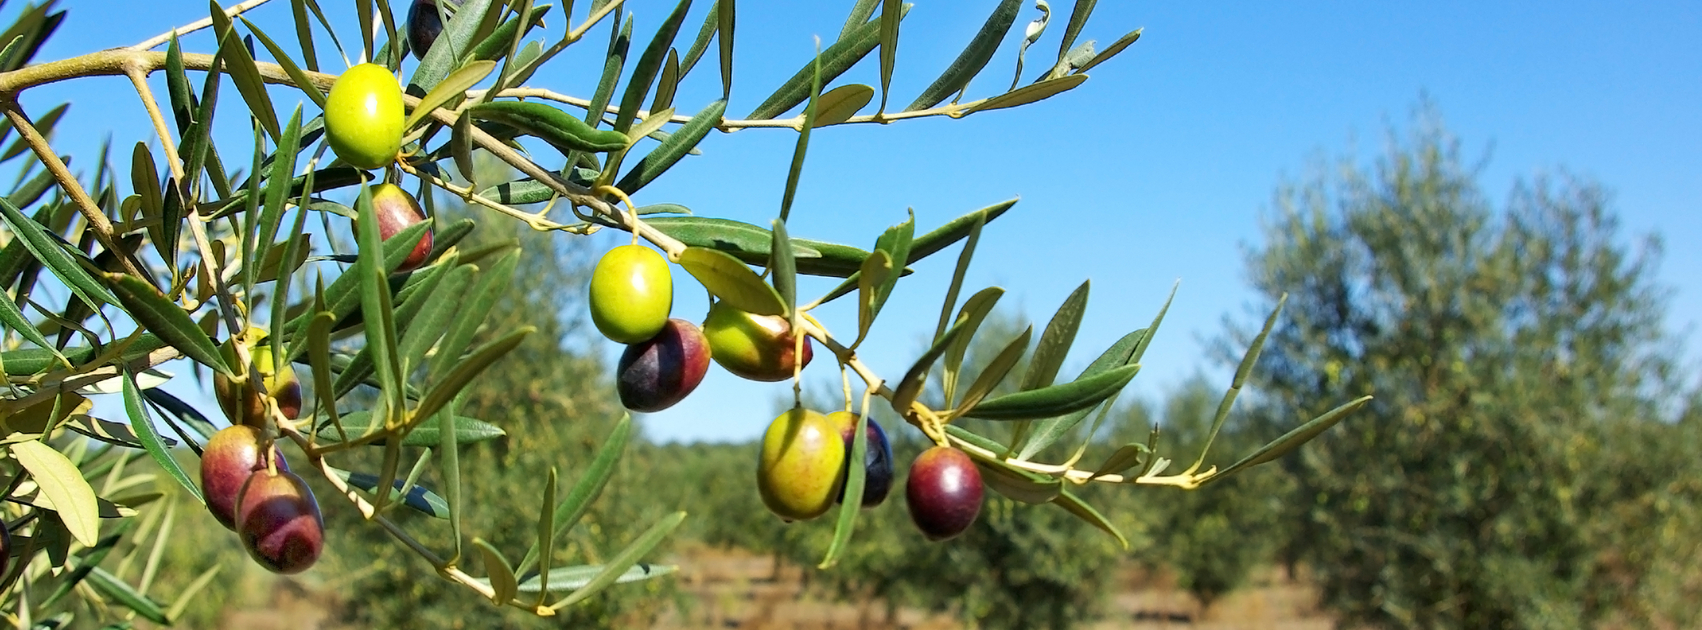 The Symbolism of the Olive Tree - The Flower Writer